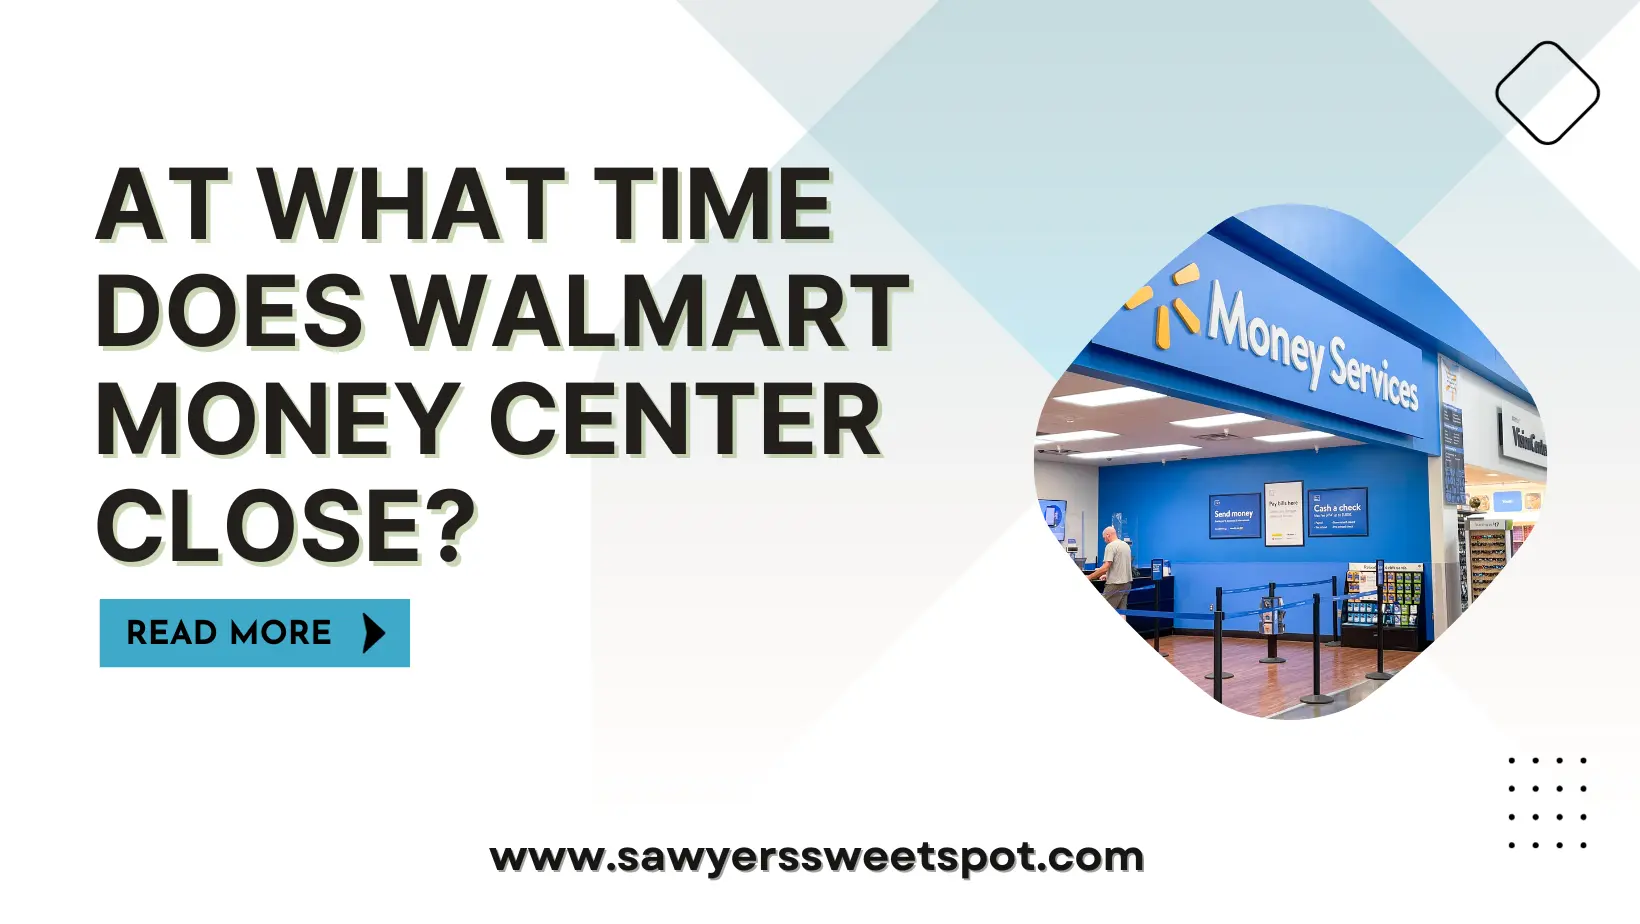 At What Time Does Walmart Money Center Close?